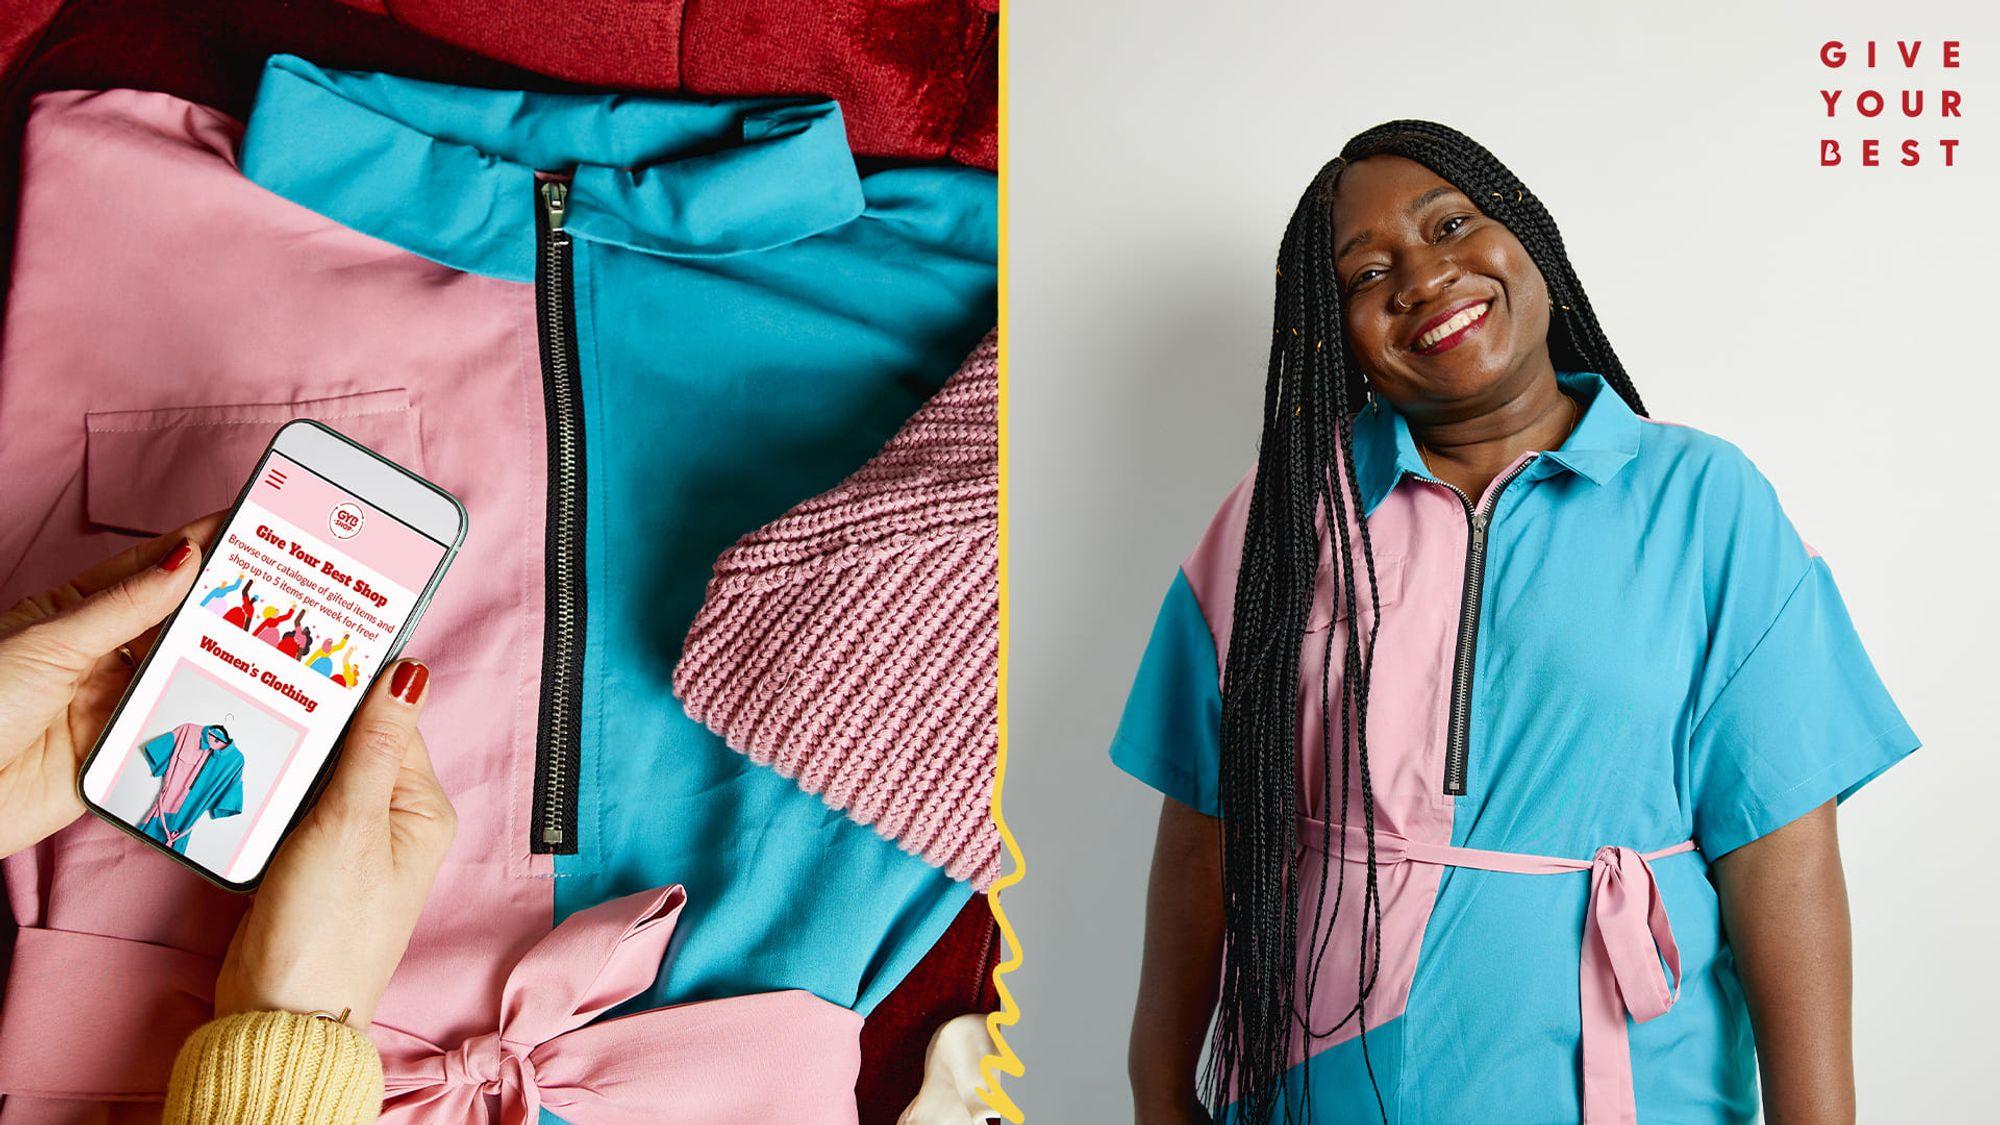 Give Your Best is a tech-based circular enterprise, and they offer an online platform where refugee women and their children who come to the UK can shop second-hand clothing items donated by people all across the UK, plus new items donated by brands, for free. Kemi runs community outreach at Give Your Best. Image source: Give Your Best.